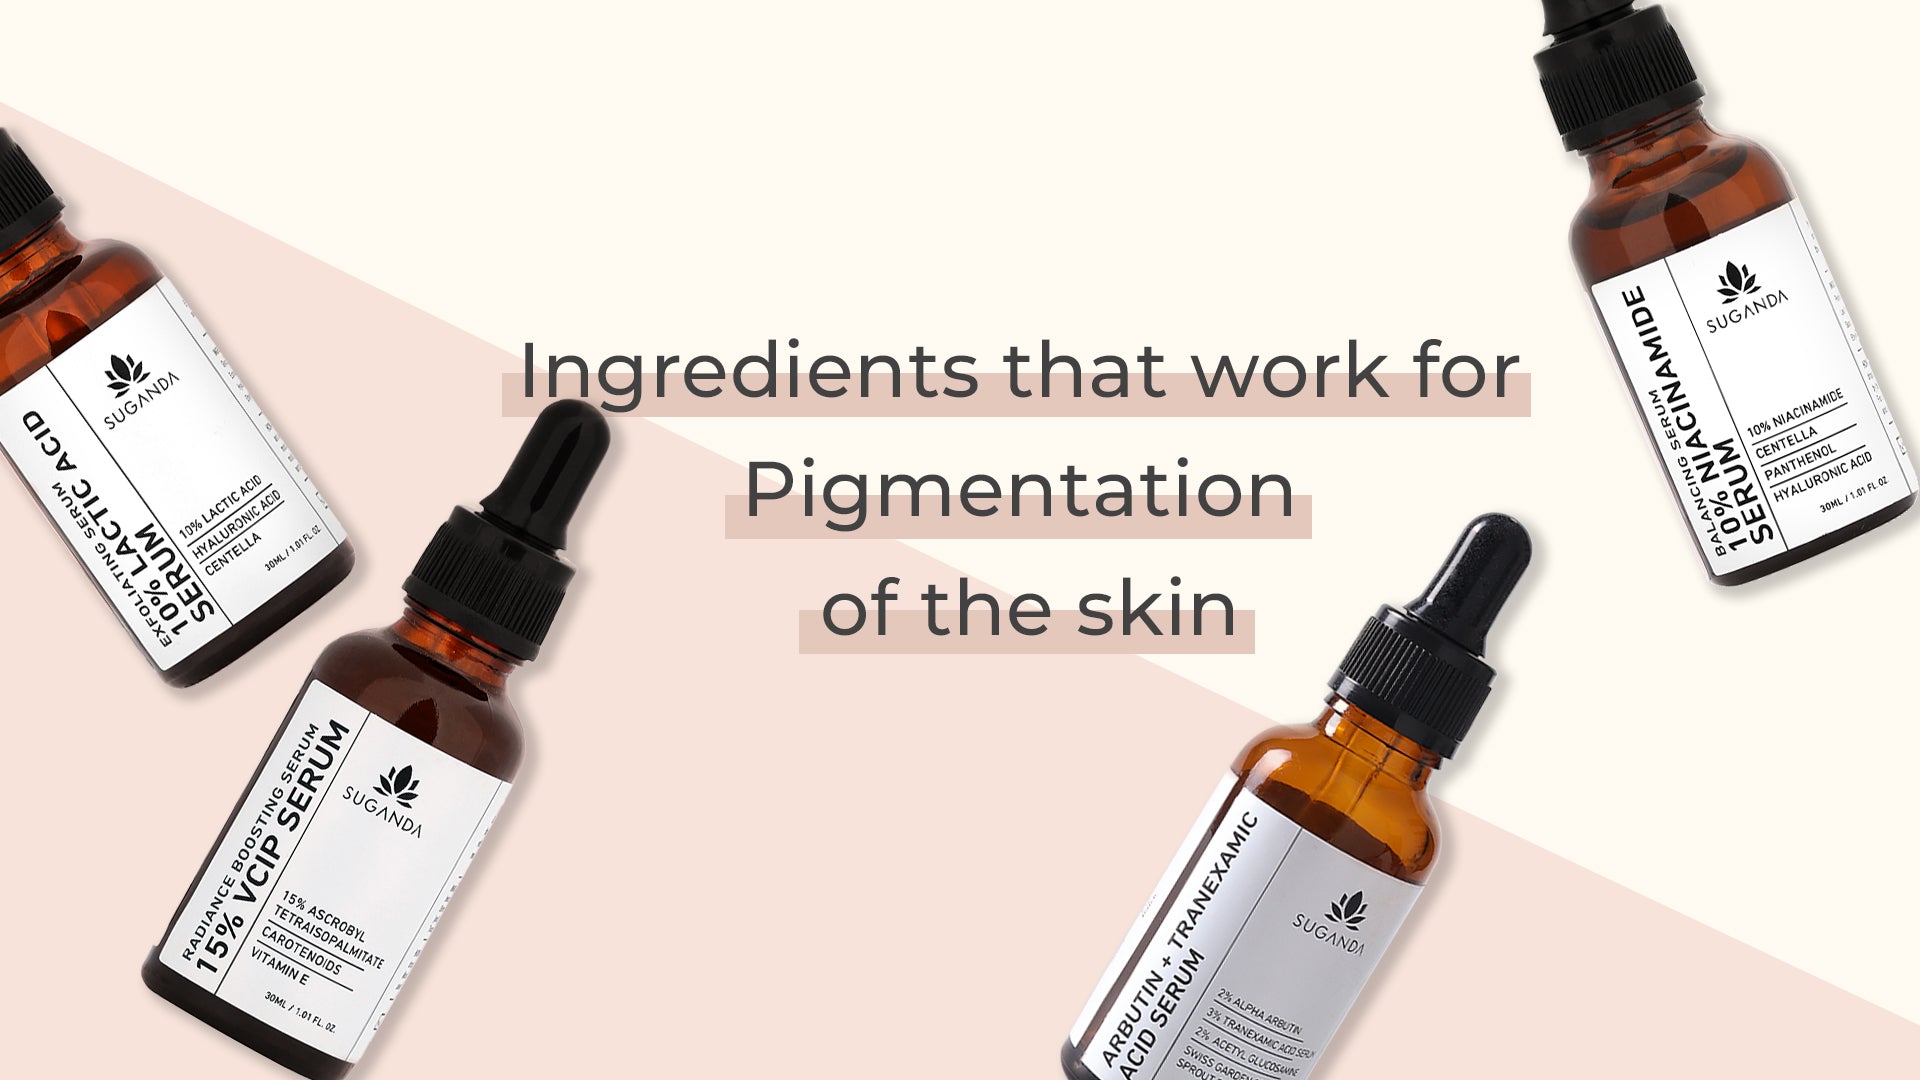 Ingredients that work for Pigmentation of the skin